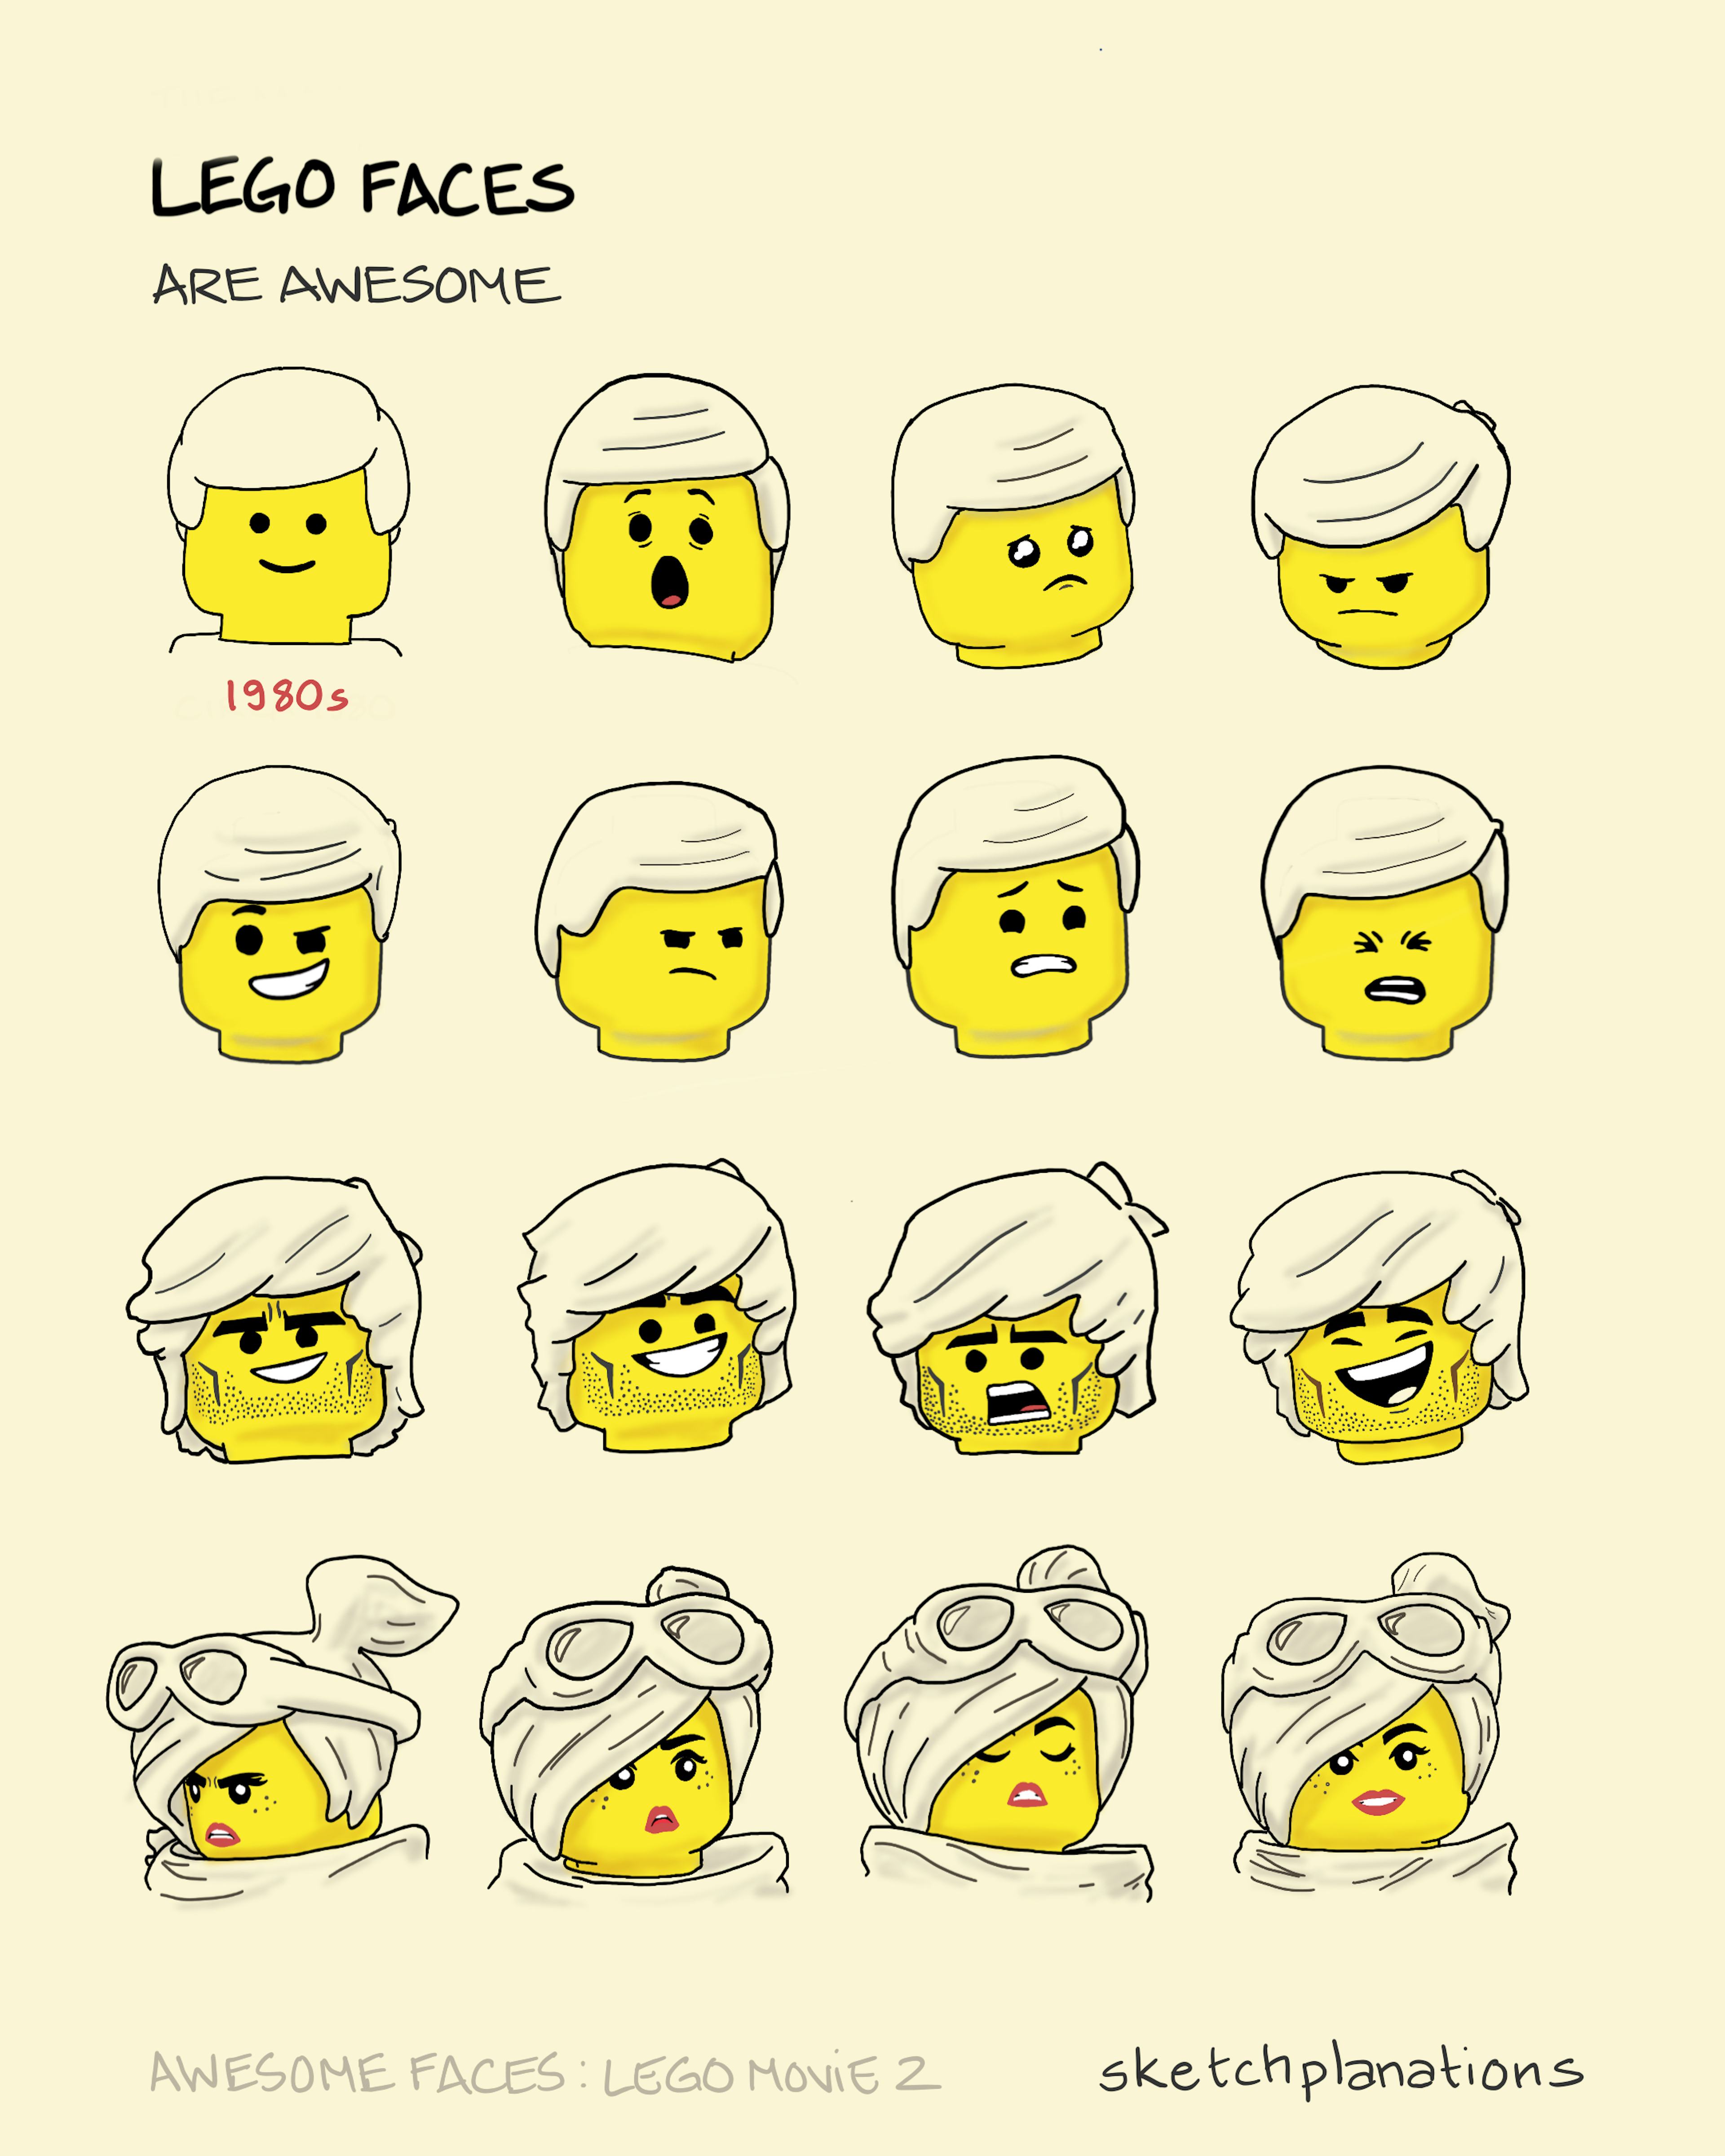 Lego faces are awesome: a comparison of the expressions on Lego faces from the Lego Movie 2 with one from the 1980s